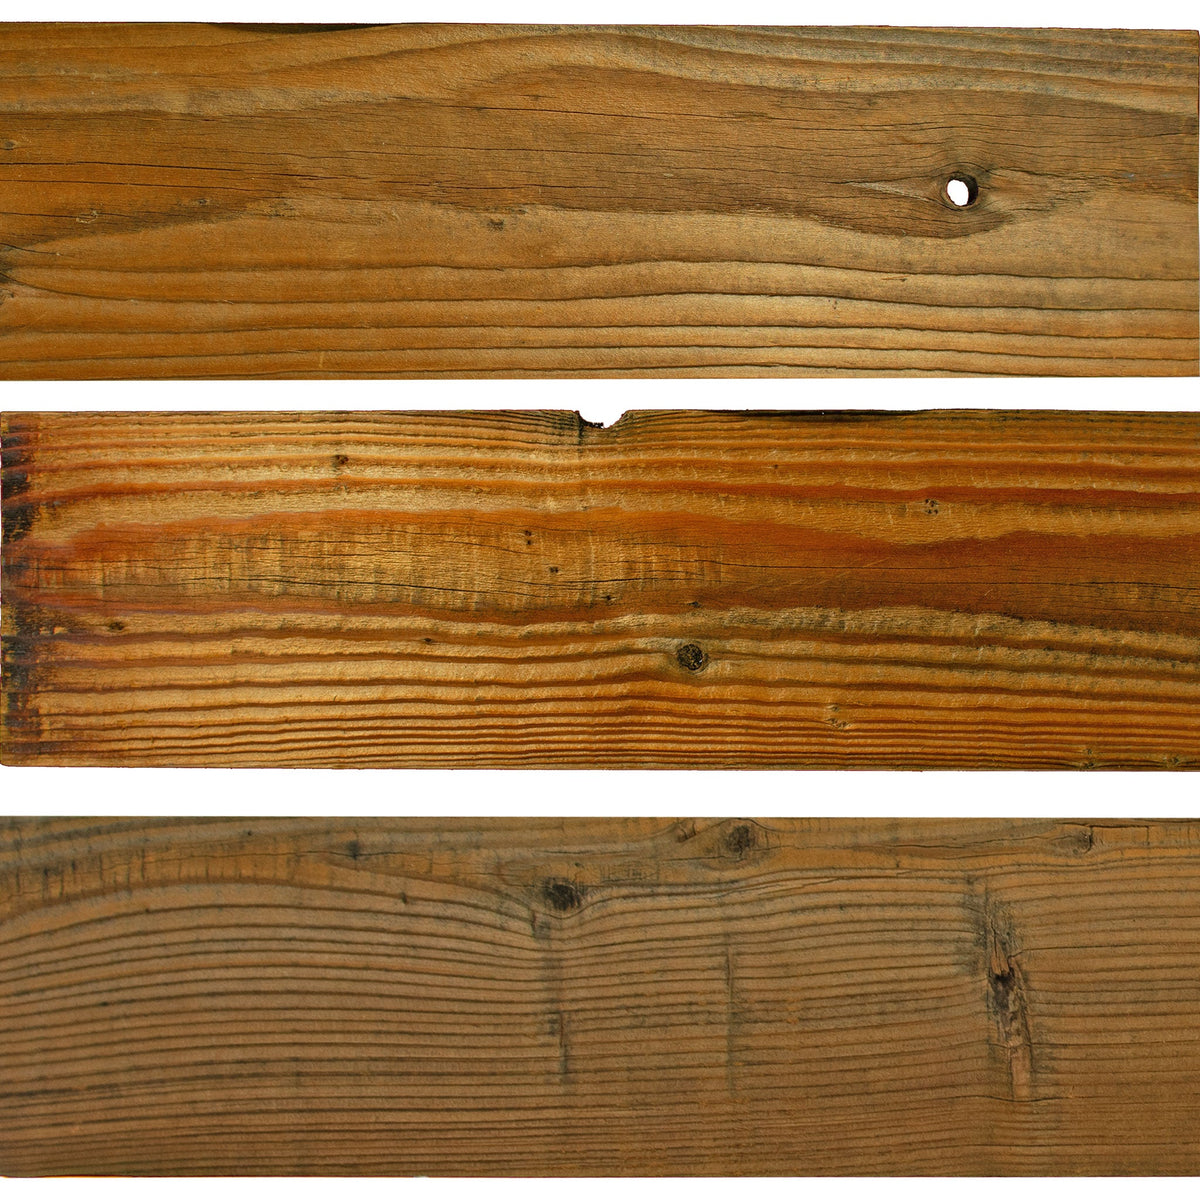 Redwood Wall Panels come with real natural wood grains, unique knots and characteristics, and weathering.